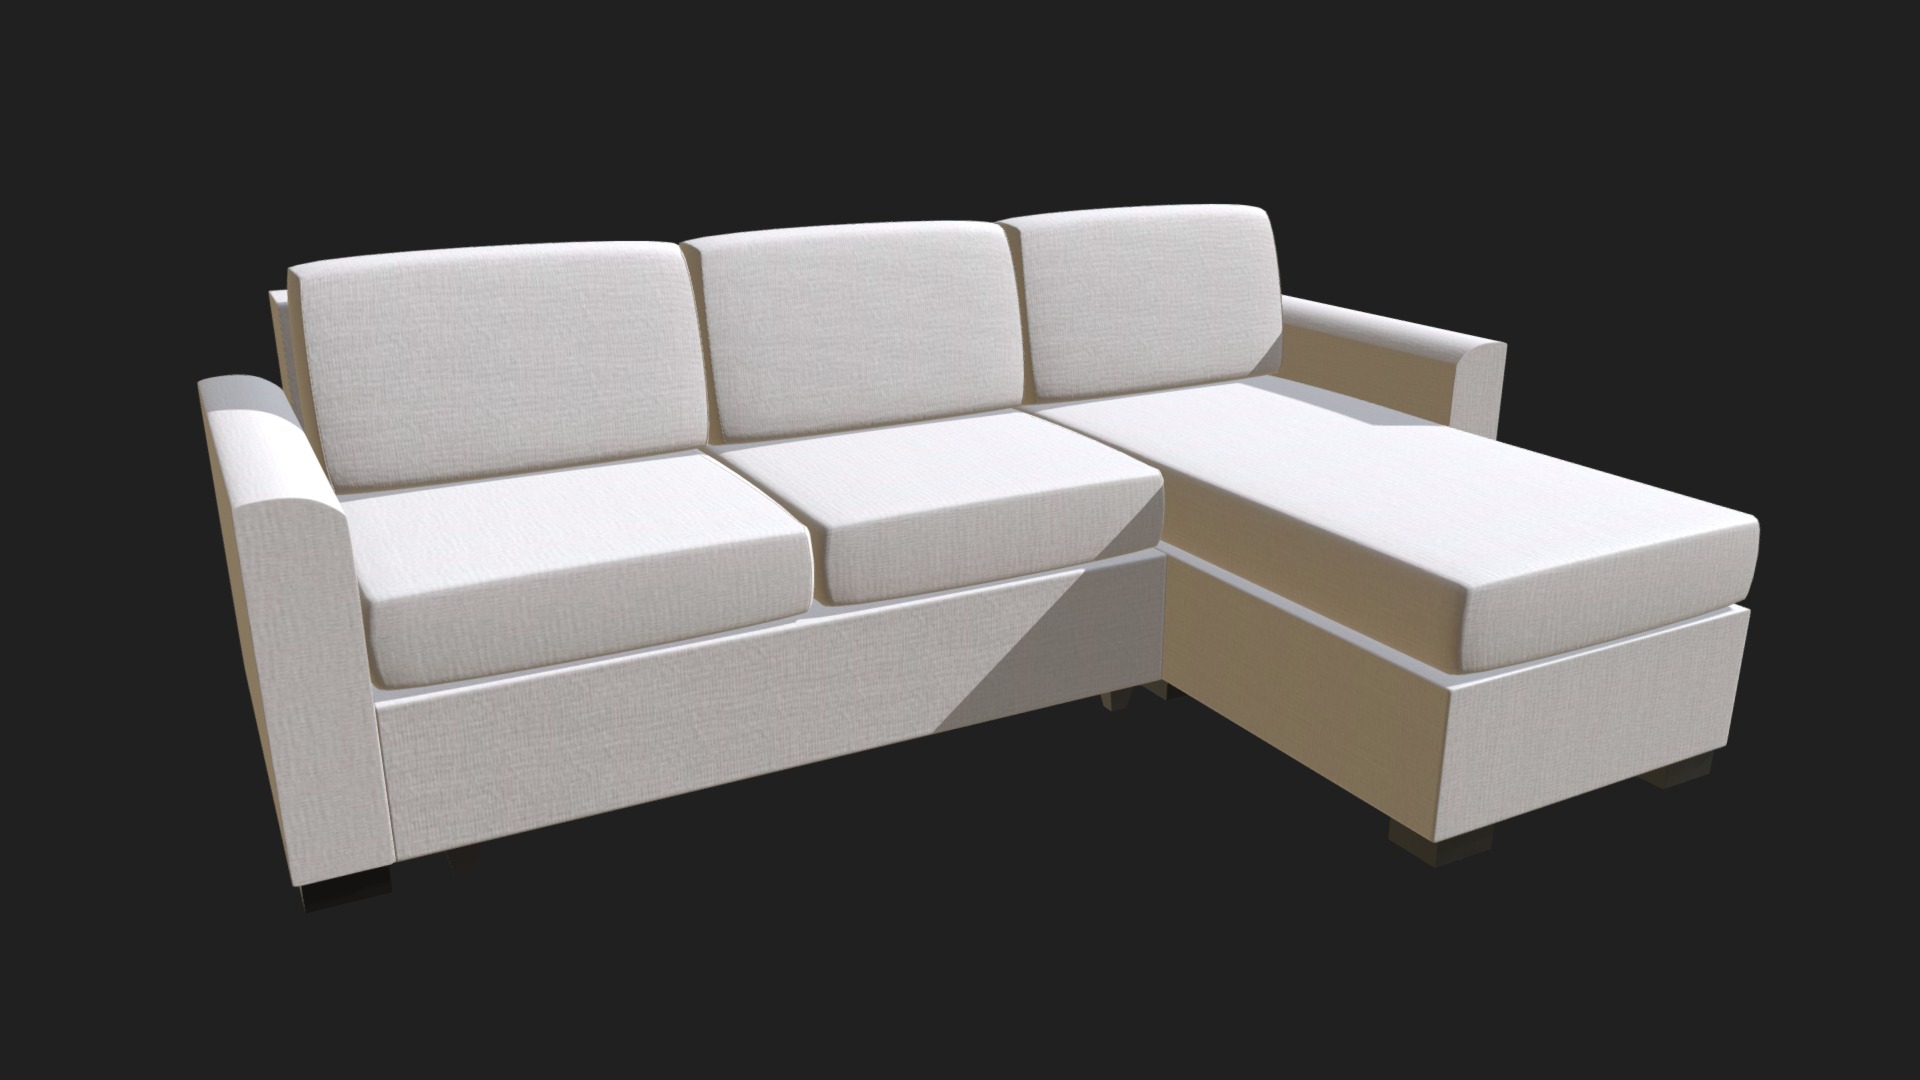 3D model Angular couch sofa - This is a 3D model of the Angular couch sofa. The 3D model is about a white couch with a black background.